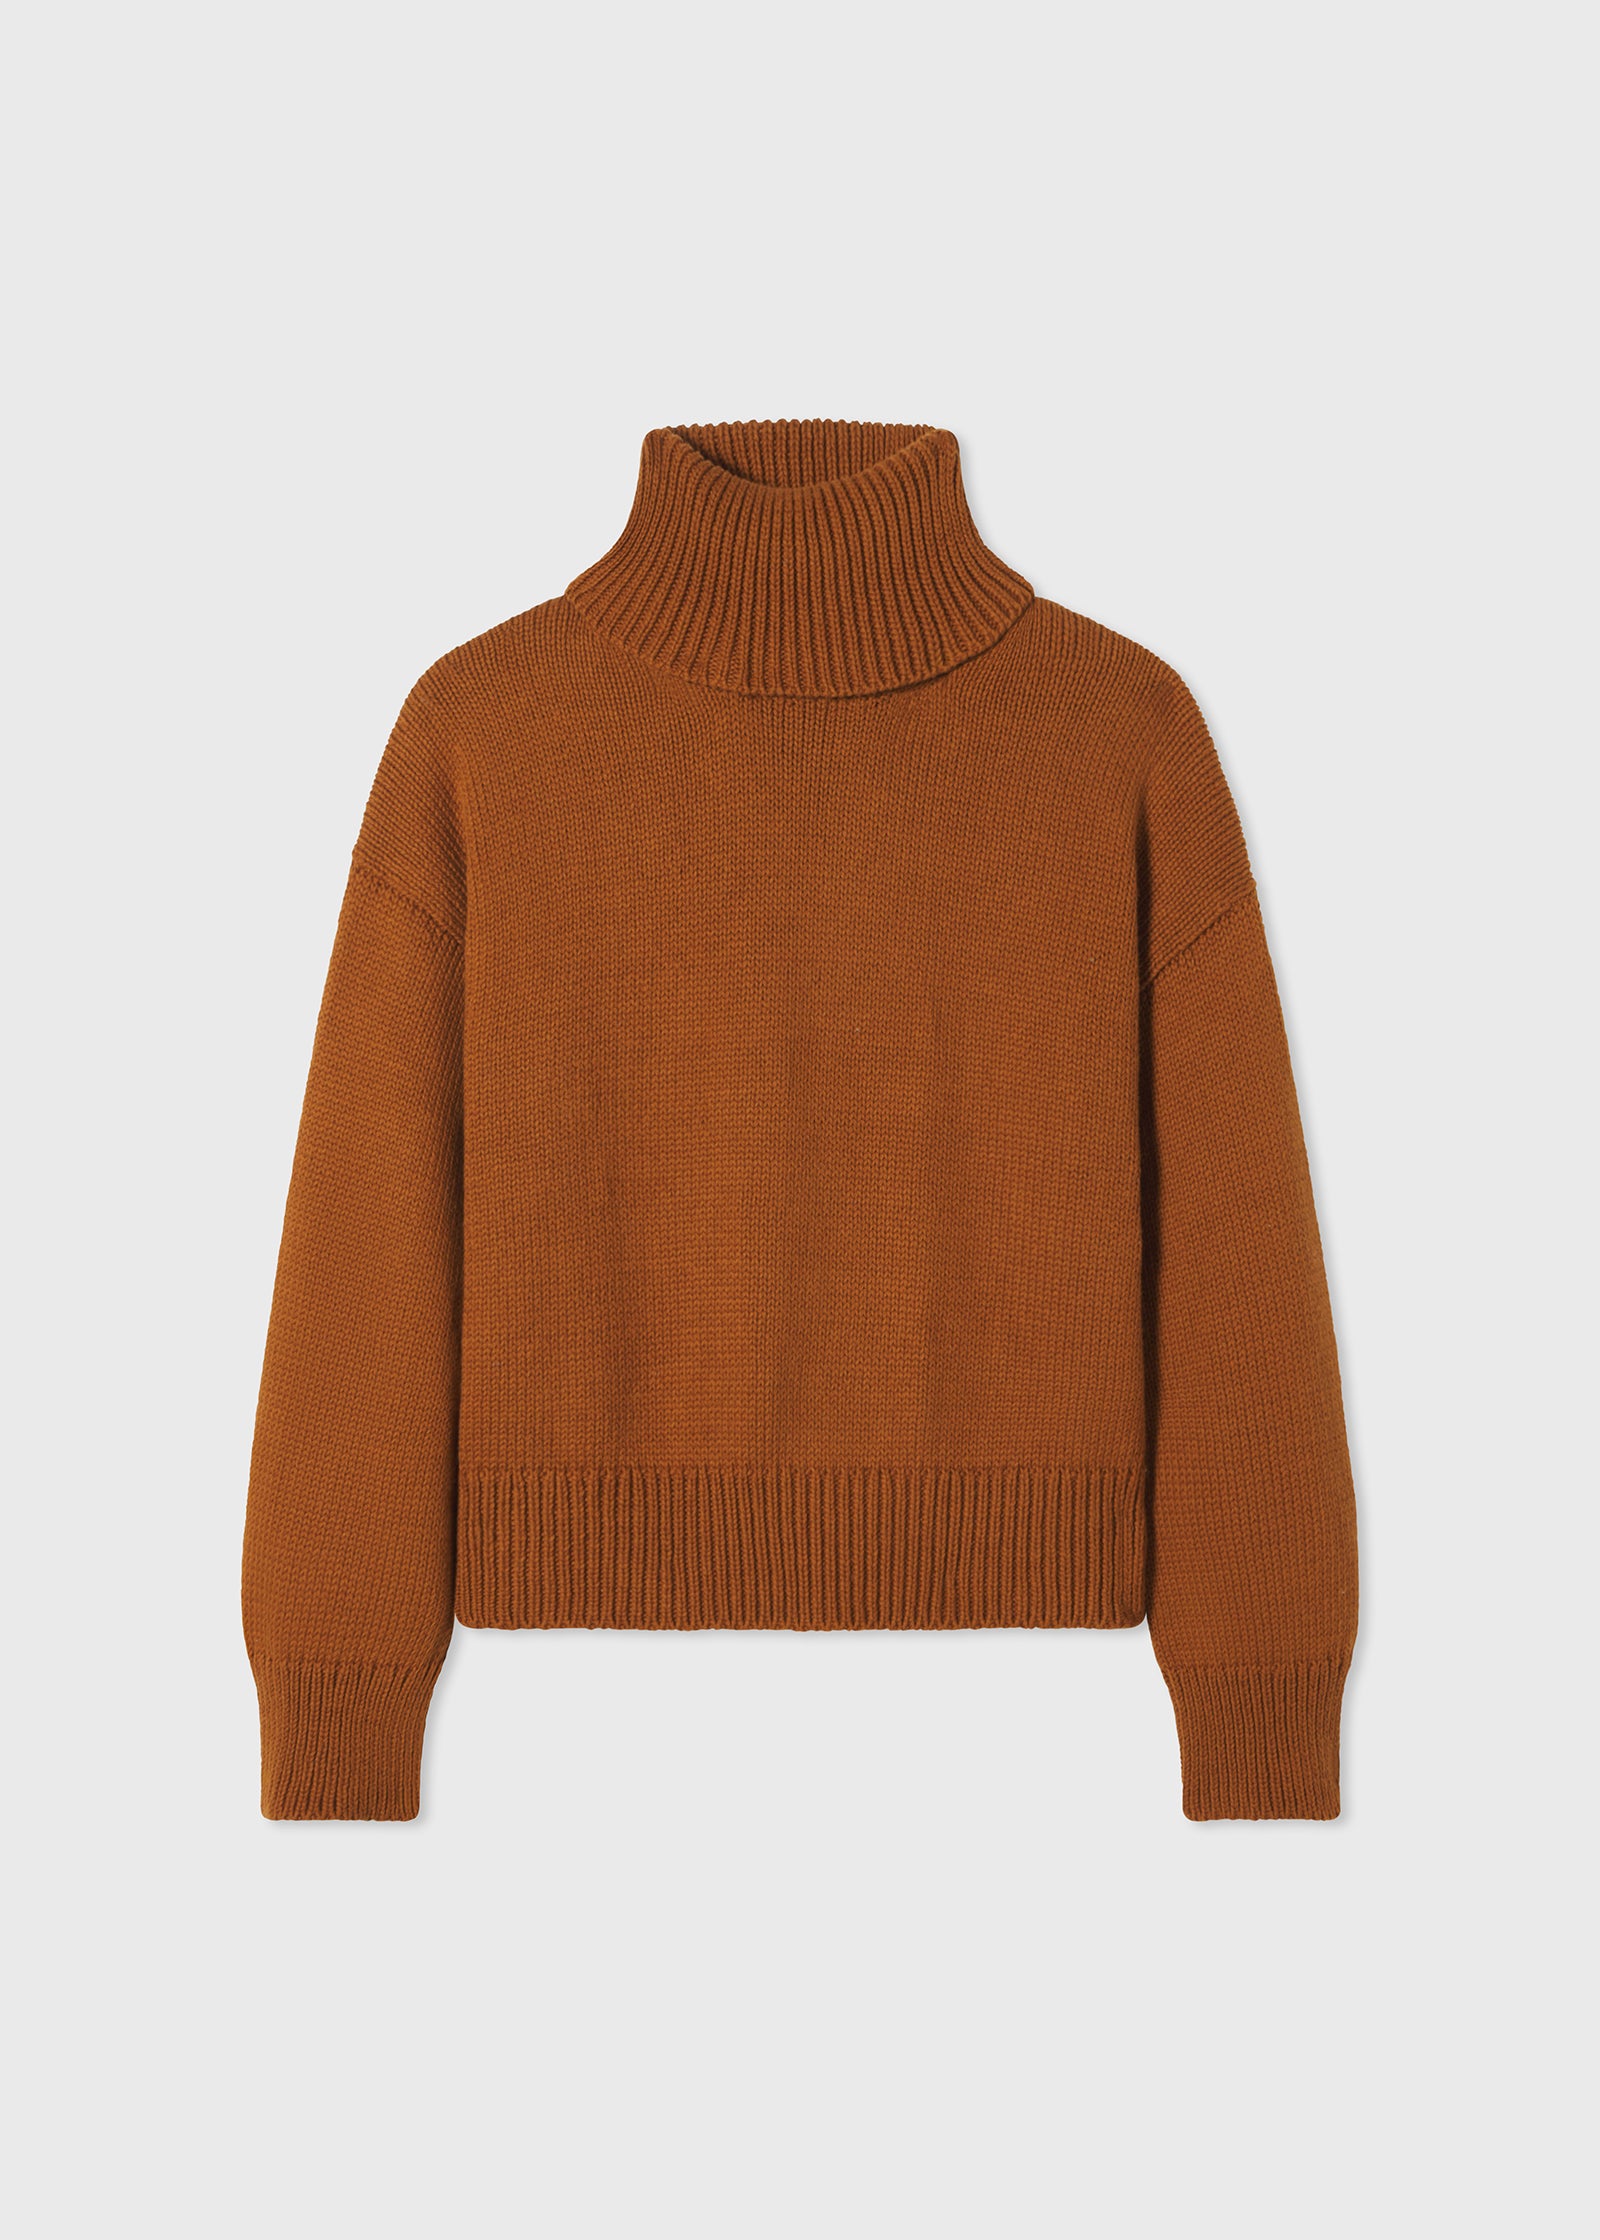 Turtleneck Sweater in Cotton Knit  - Chestnut - CO Collections